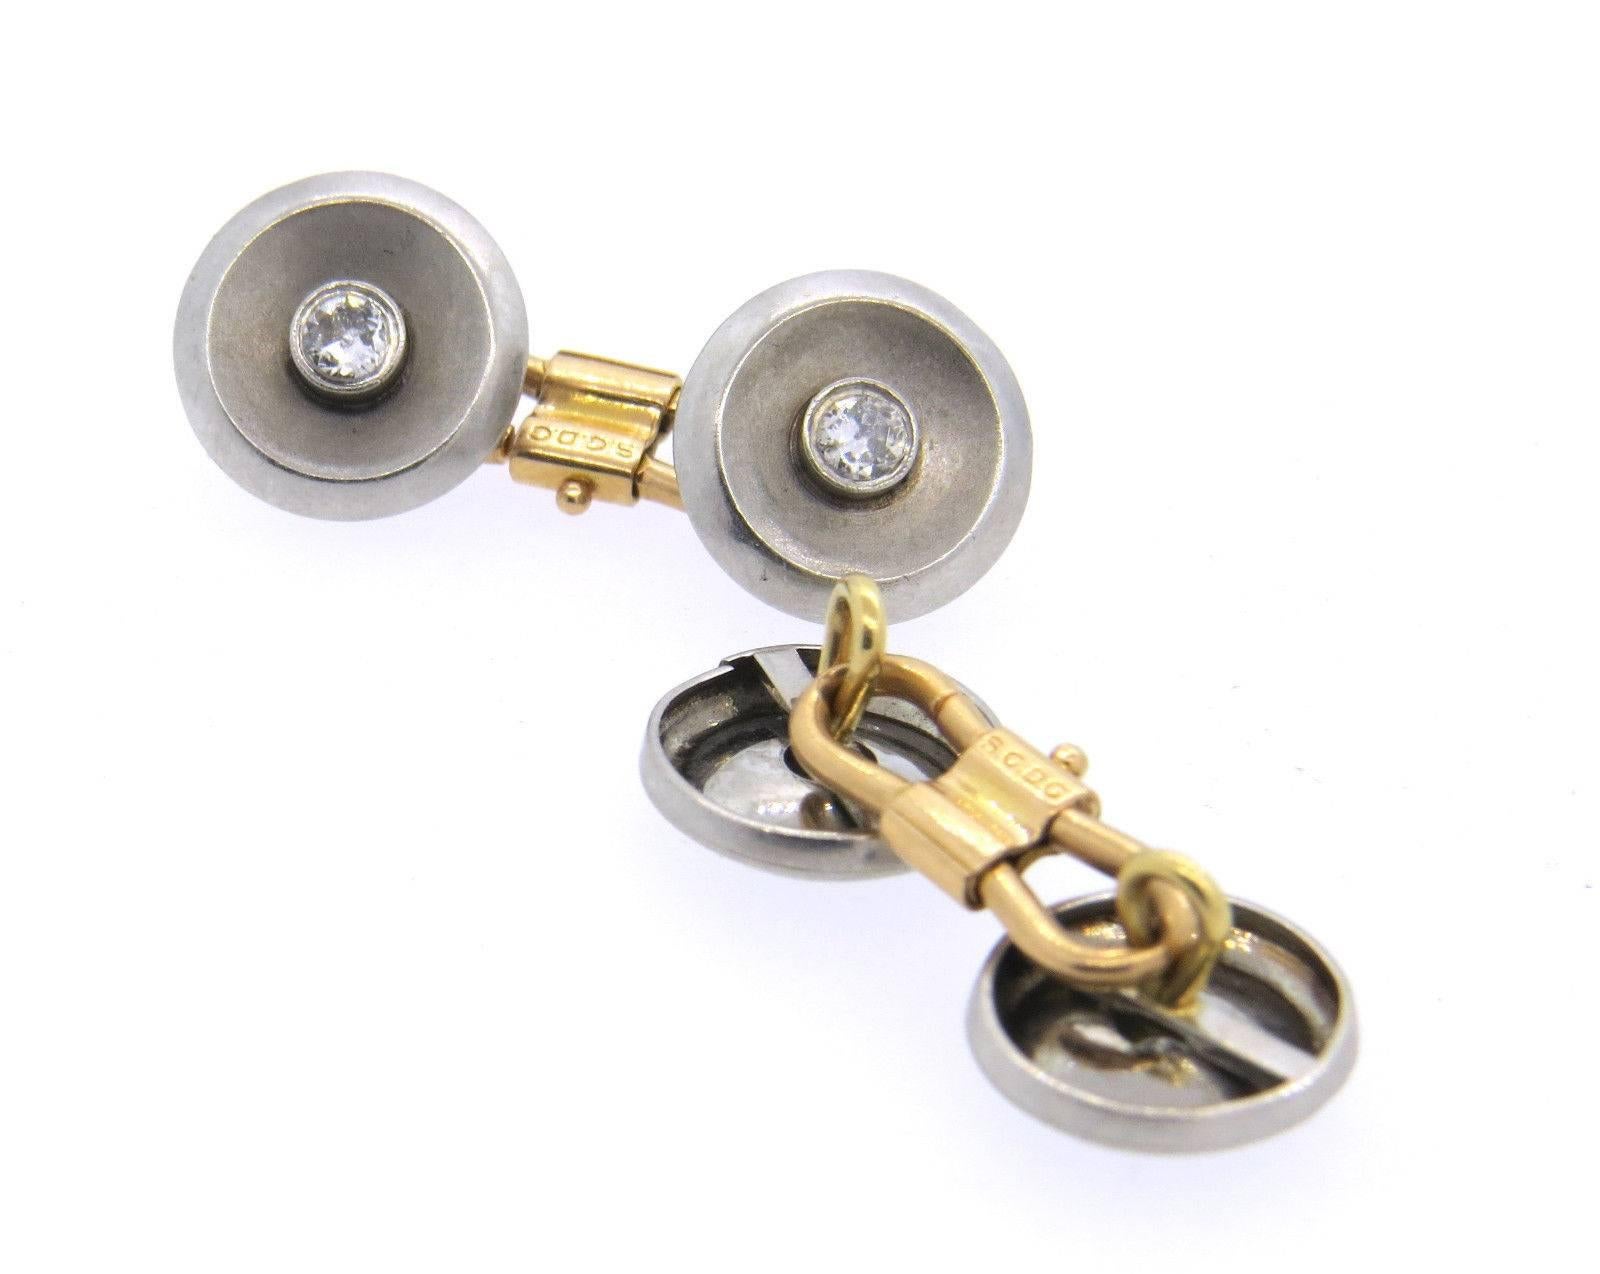 A pair of French Deco 18k yellow and white gold cufflinks set with approx. 0.60ctw of H/SI diamonds.  The cufflinks measure 12.5mm in diameter.  Marked: Brevete, SGDC.  The weight of the cufflinks is 9.1 grams.